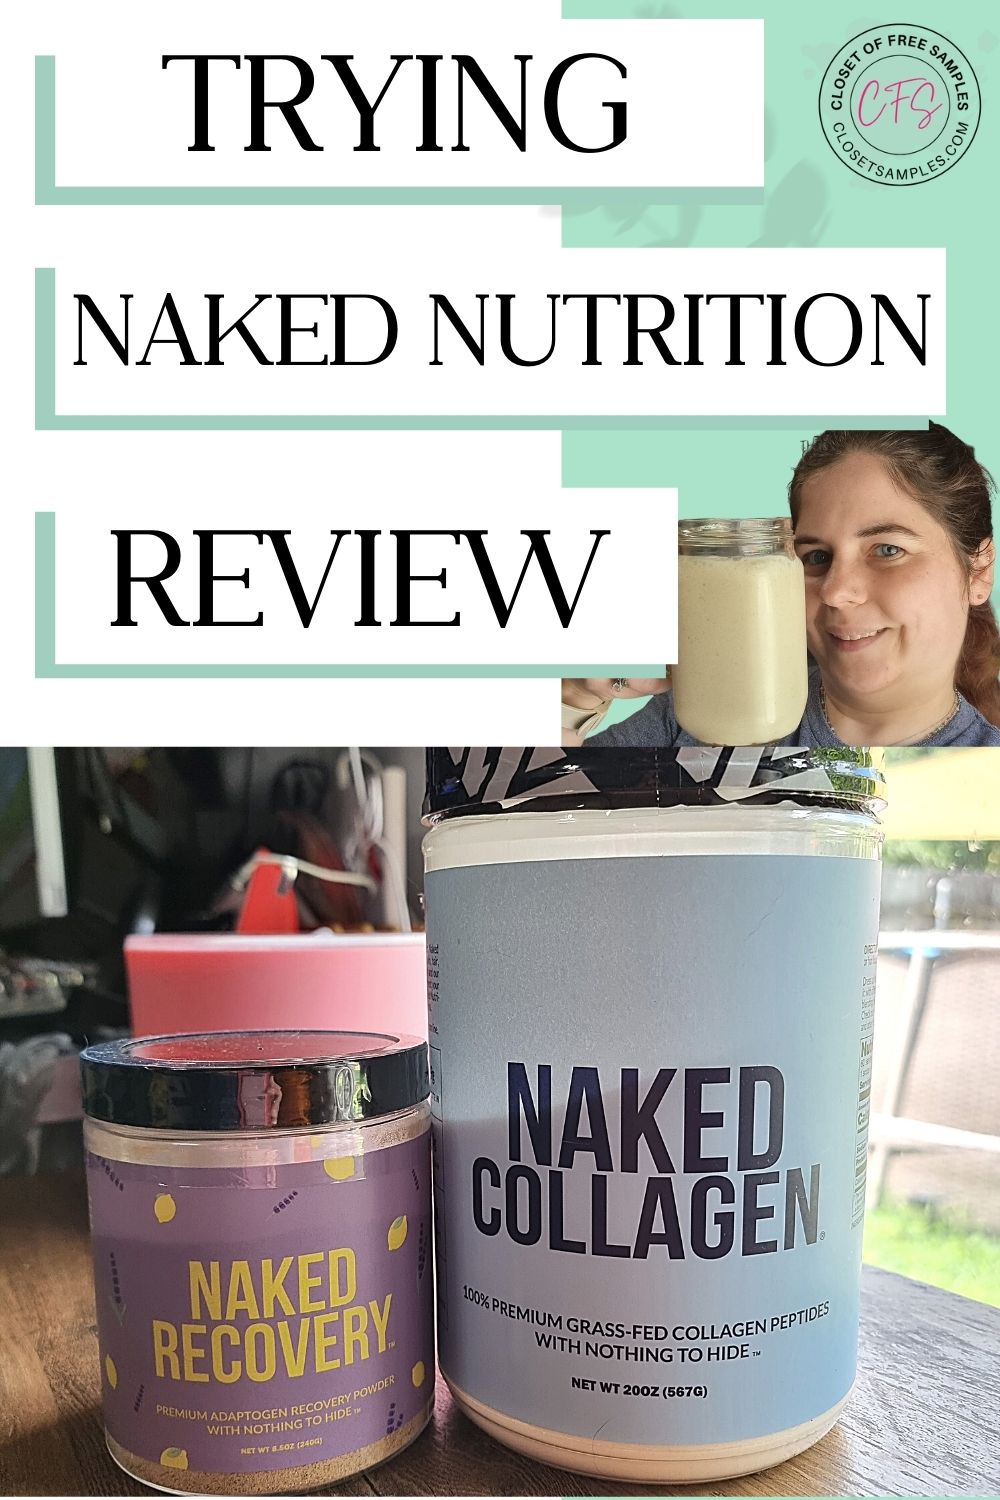 Trying Naked Nutrition Products Review Closetsamples Pinterest